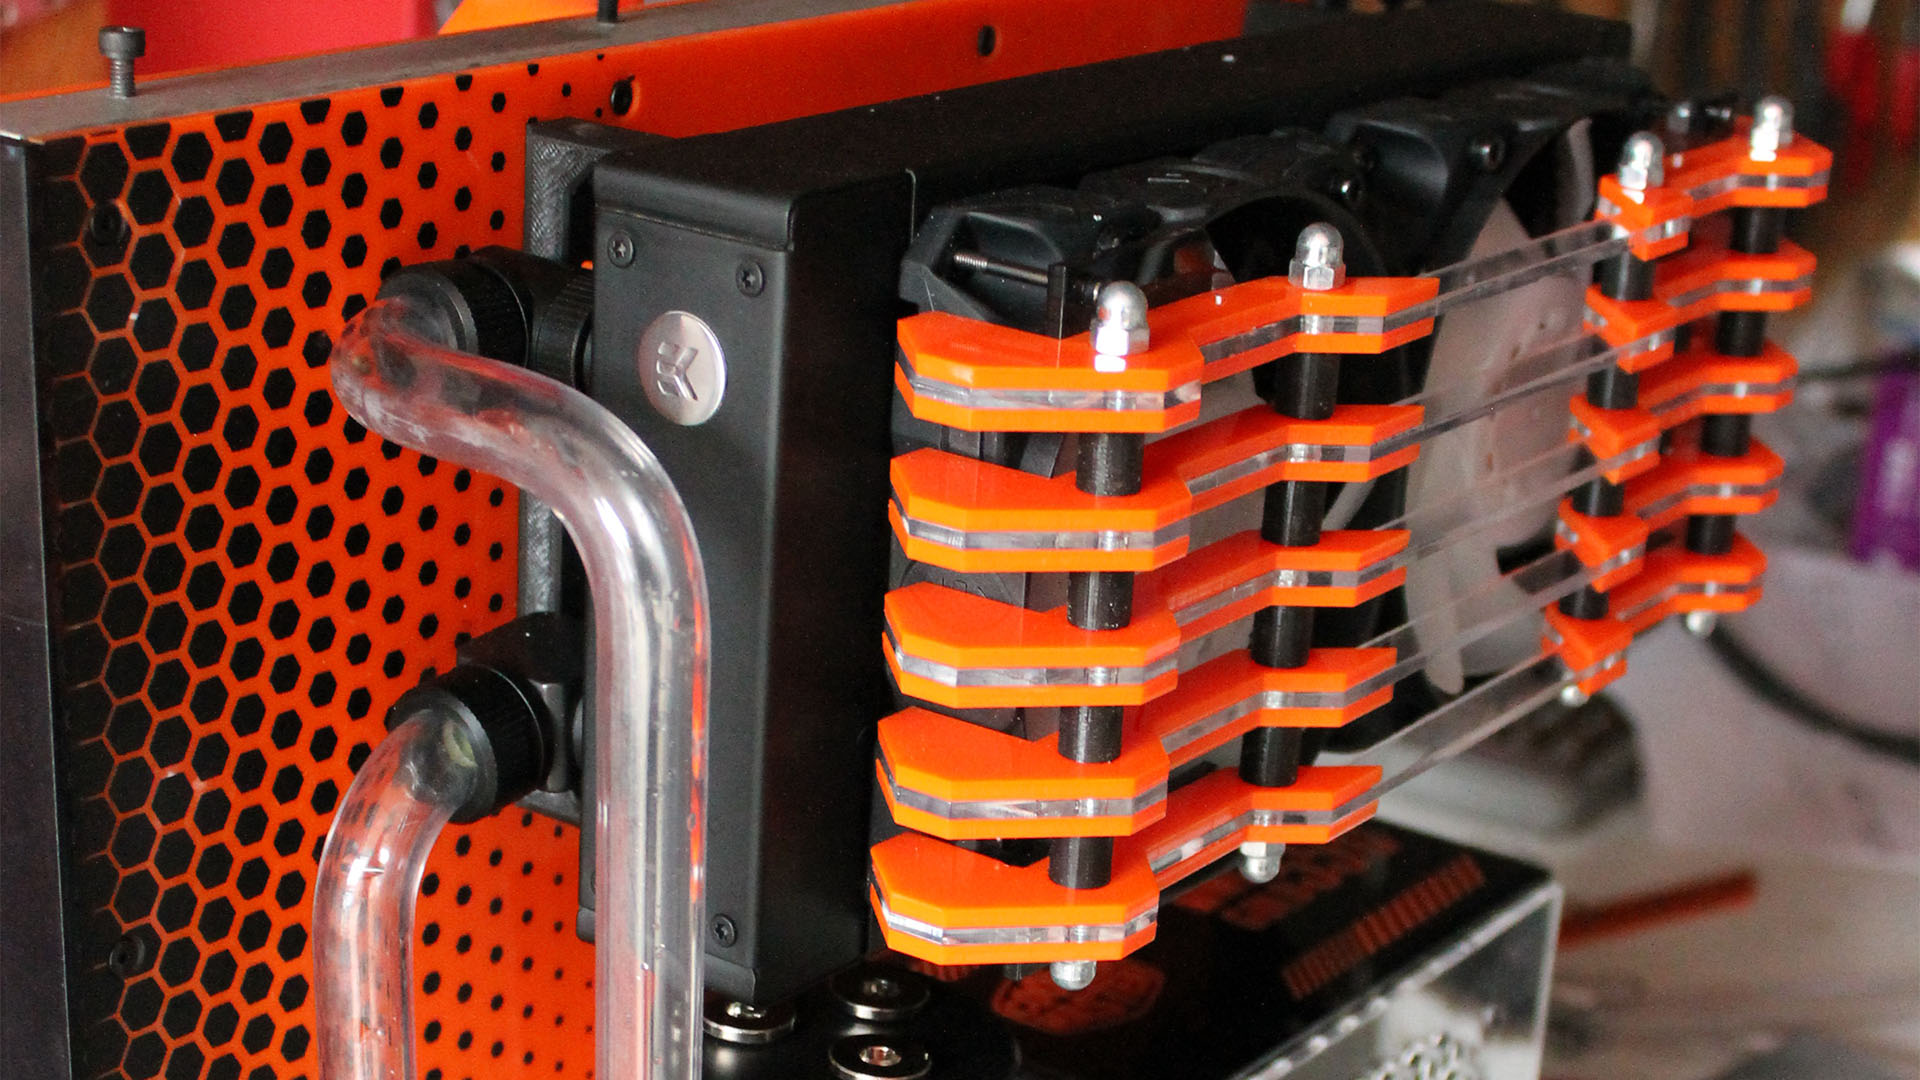 The radiator inside the gaming PC